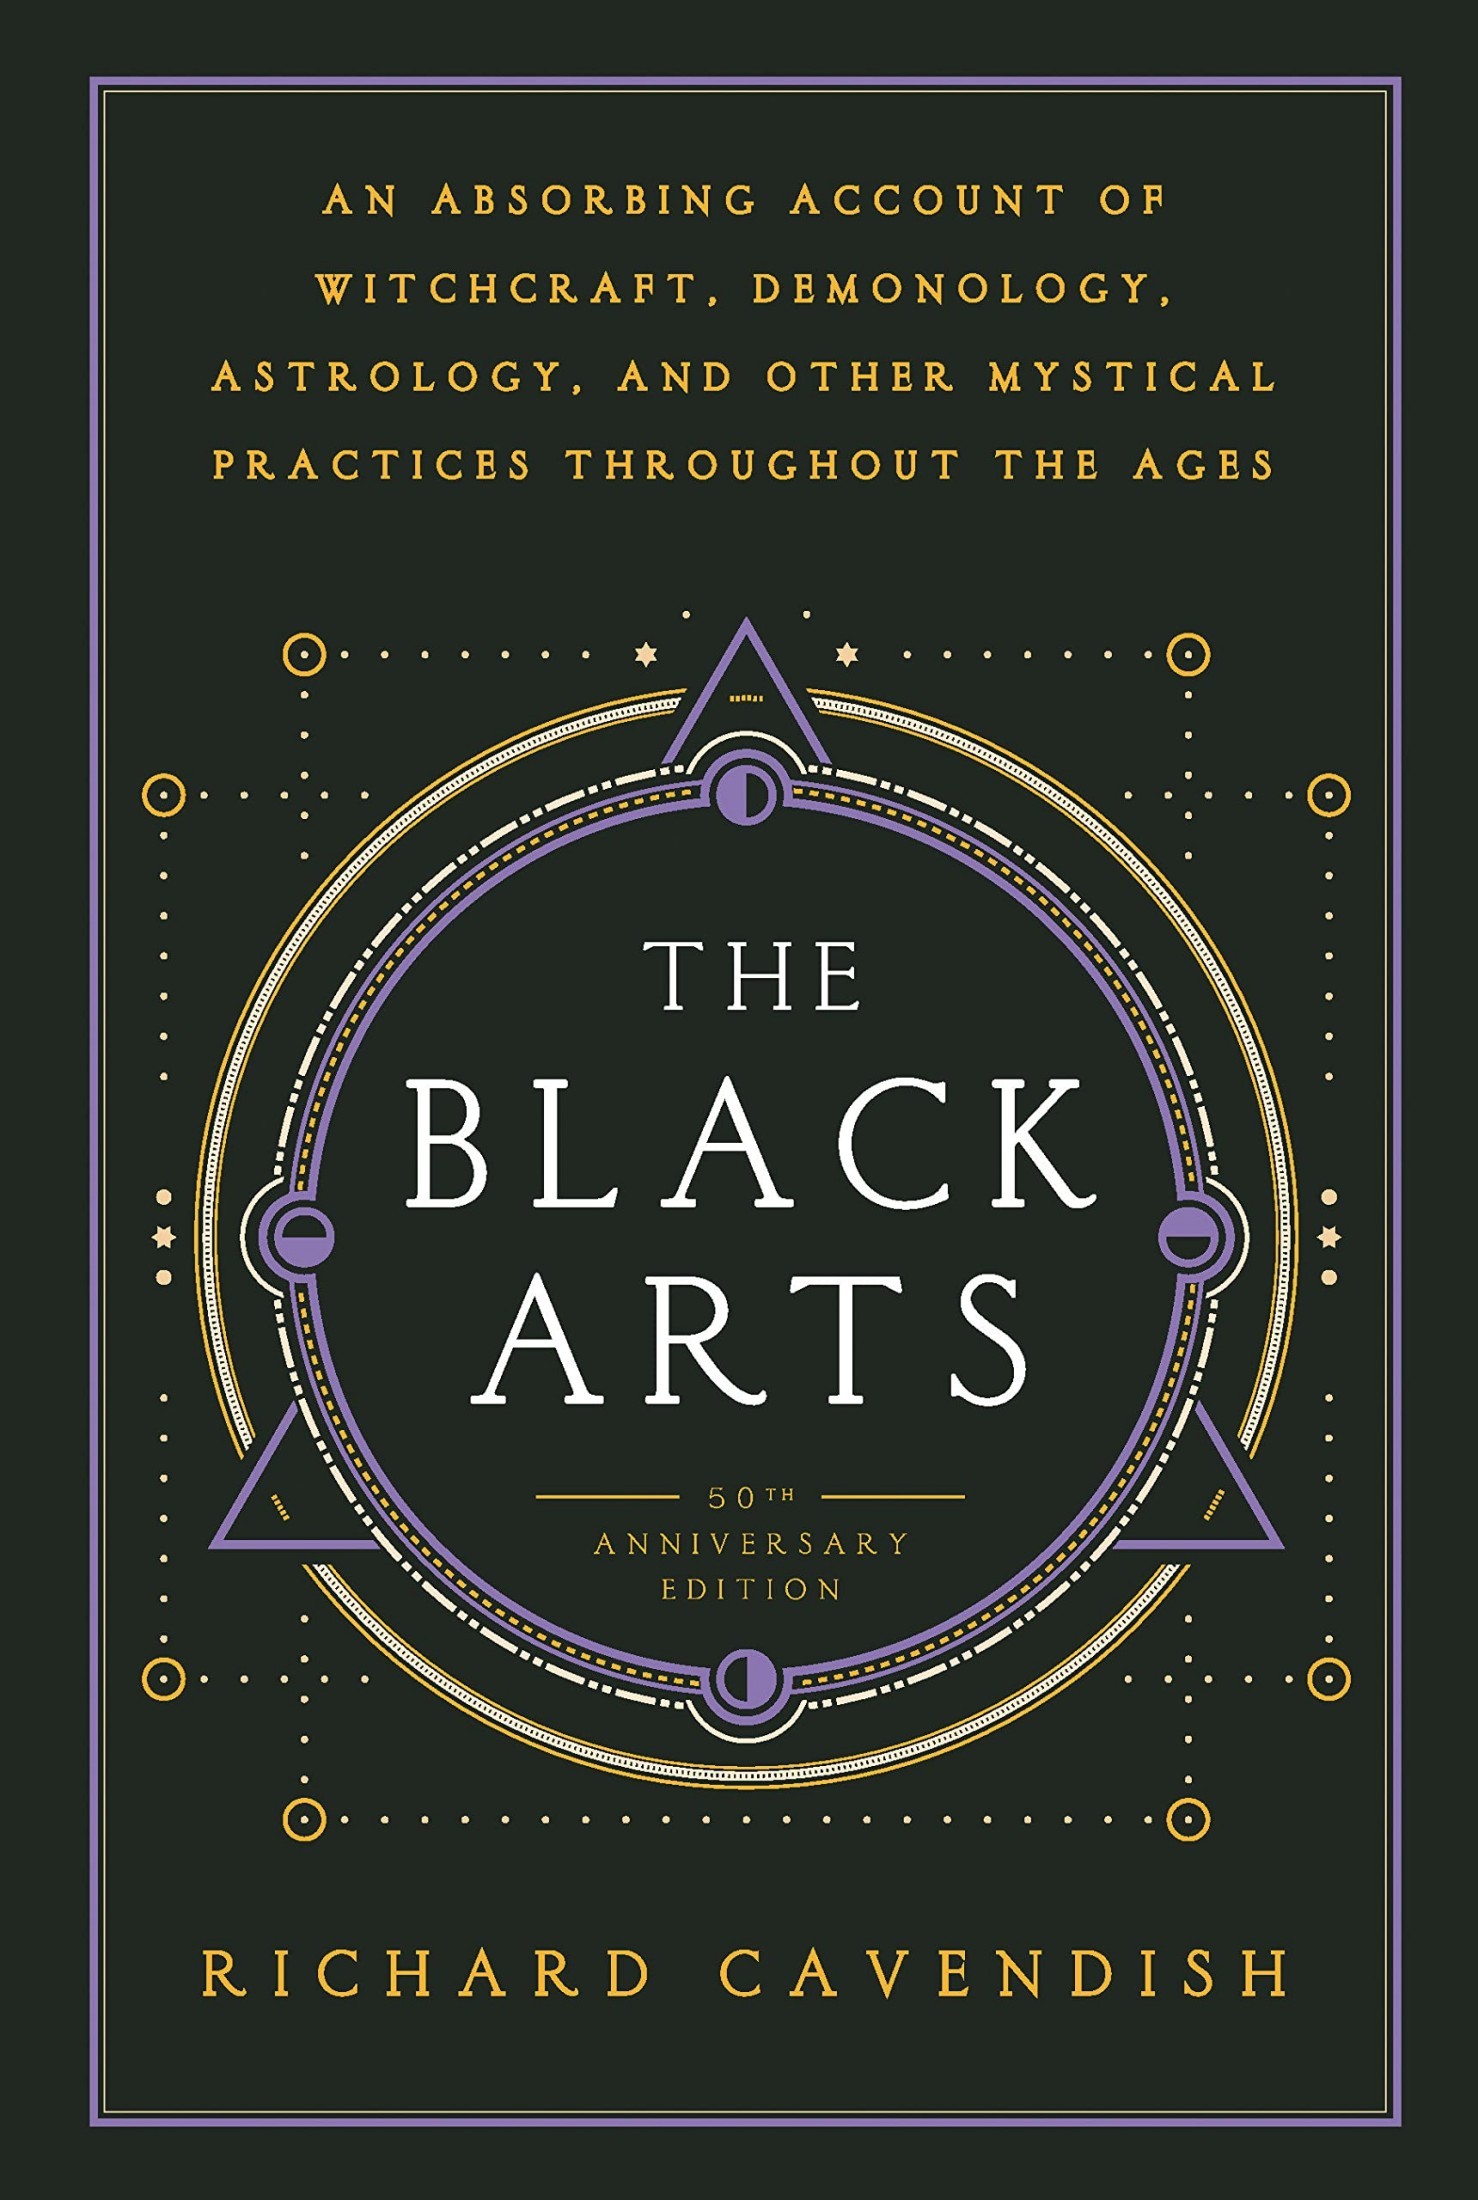 The Black Arts: A Concise History of Witchcraft, Demonology, Astrology, and Other Mystical Practices Throughout the Ages